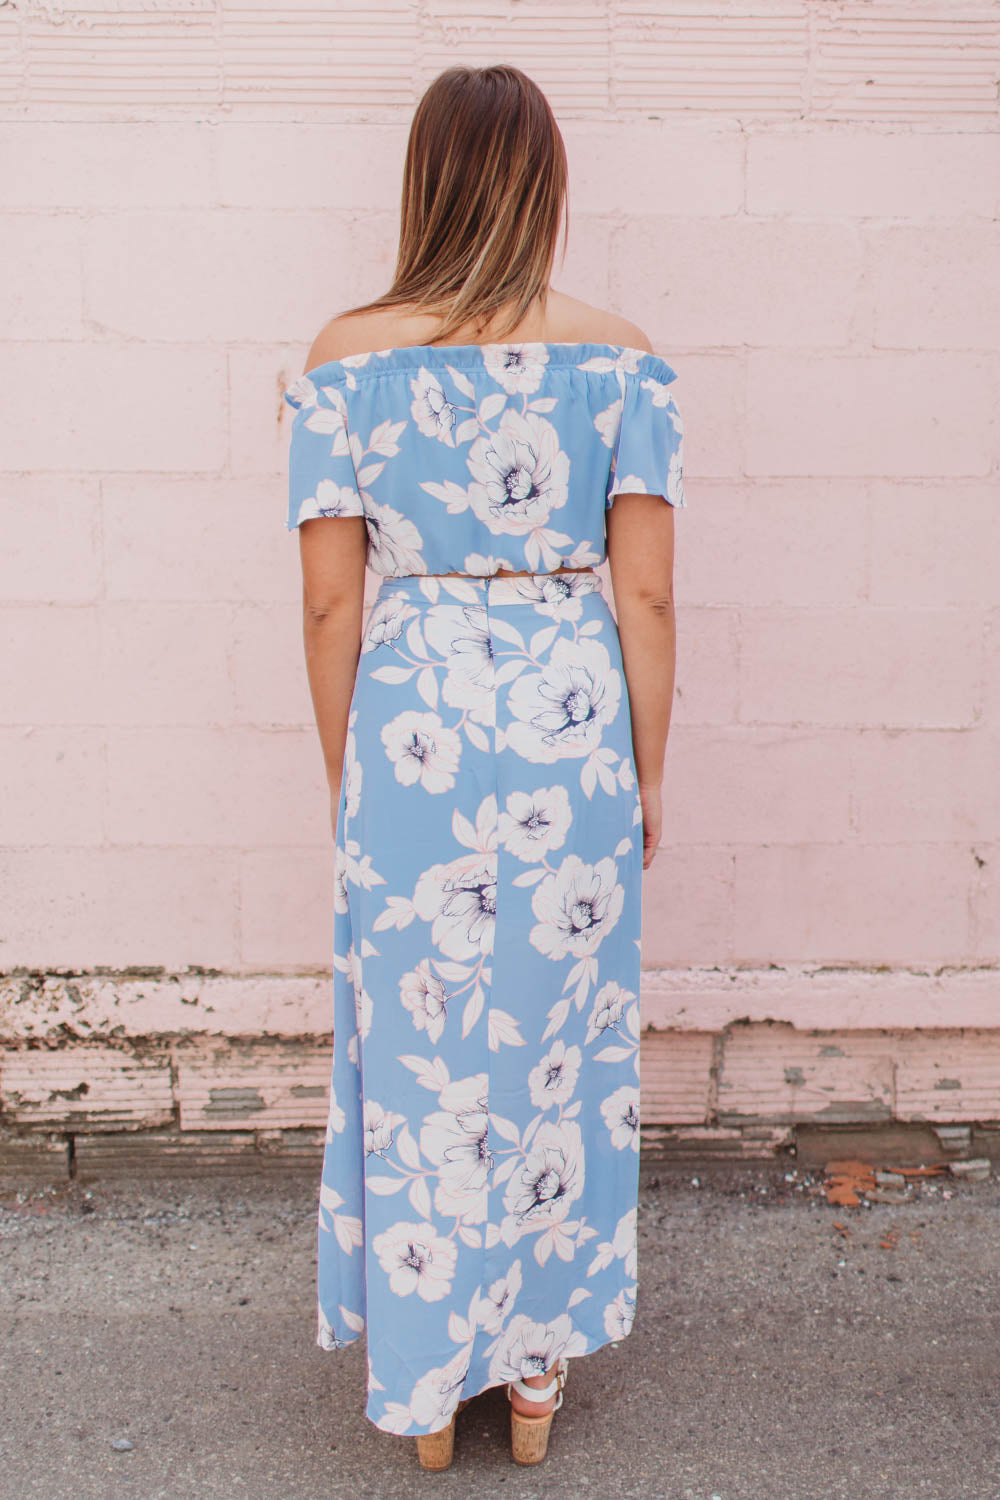 Skirt - Floral Wrap Maxi Skirt with Slit